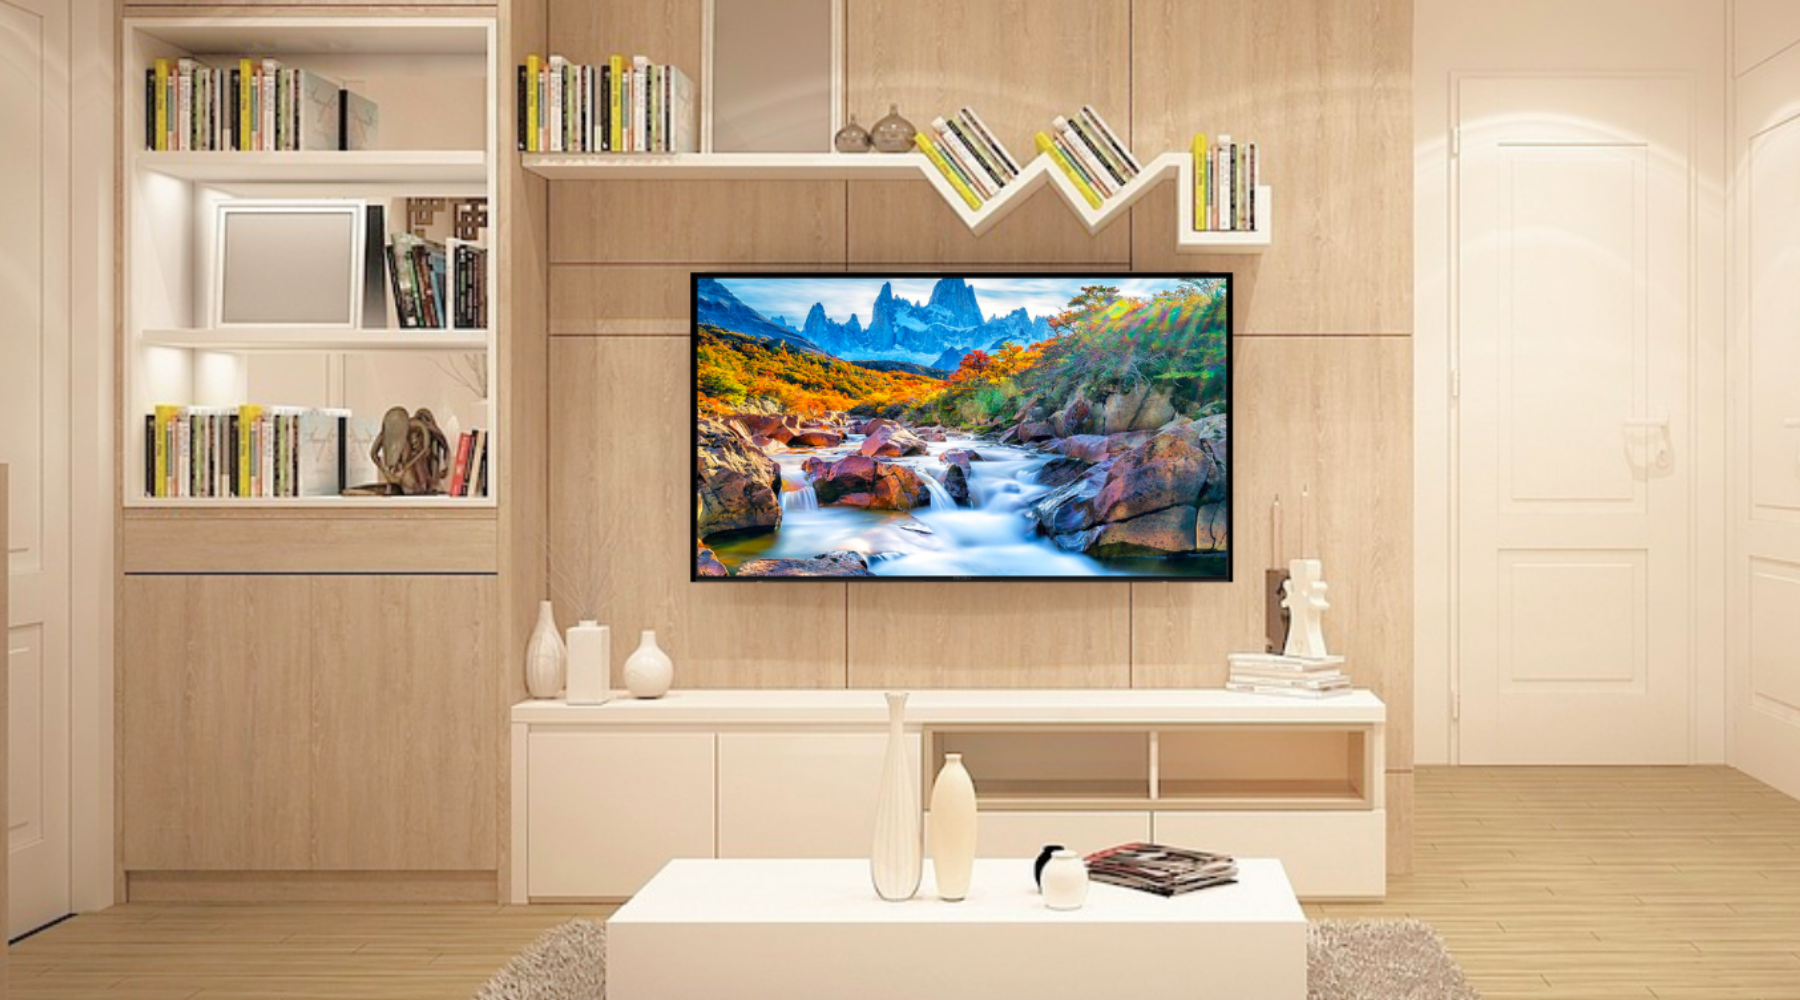 Best Tv Size For Your Hdb 65 Inch Or